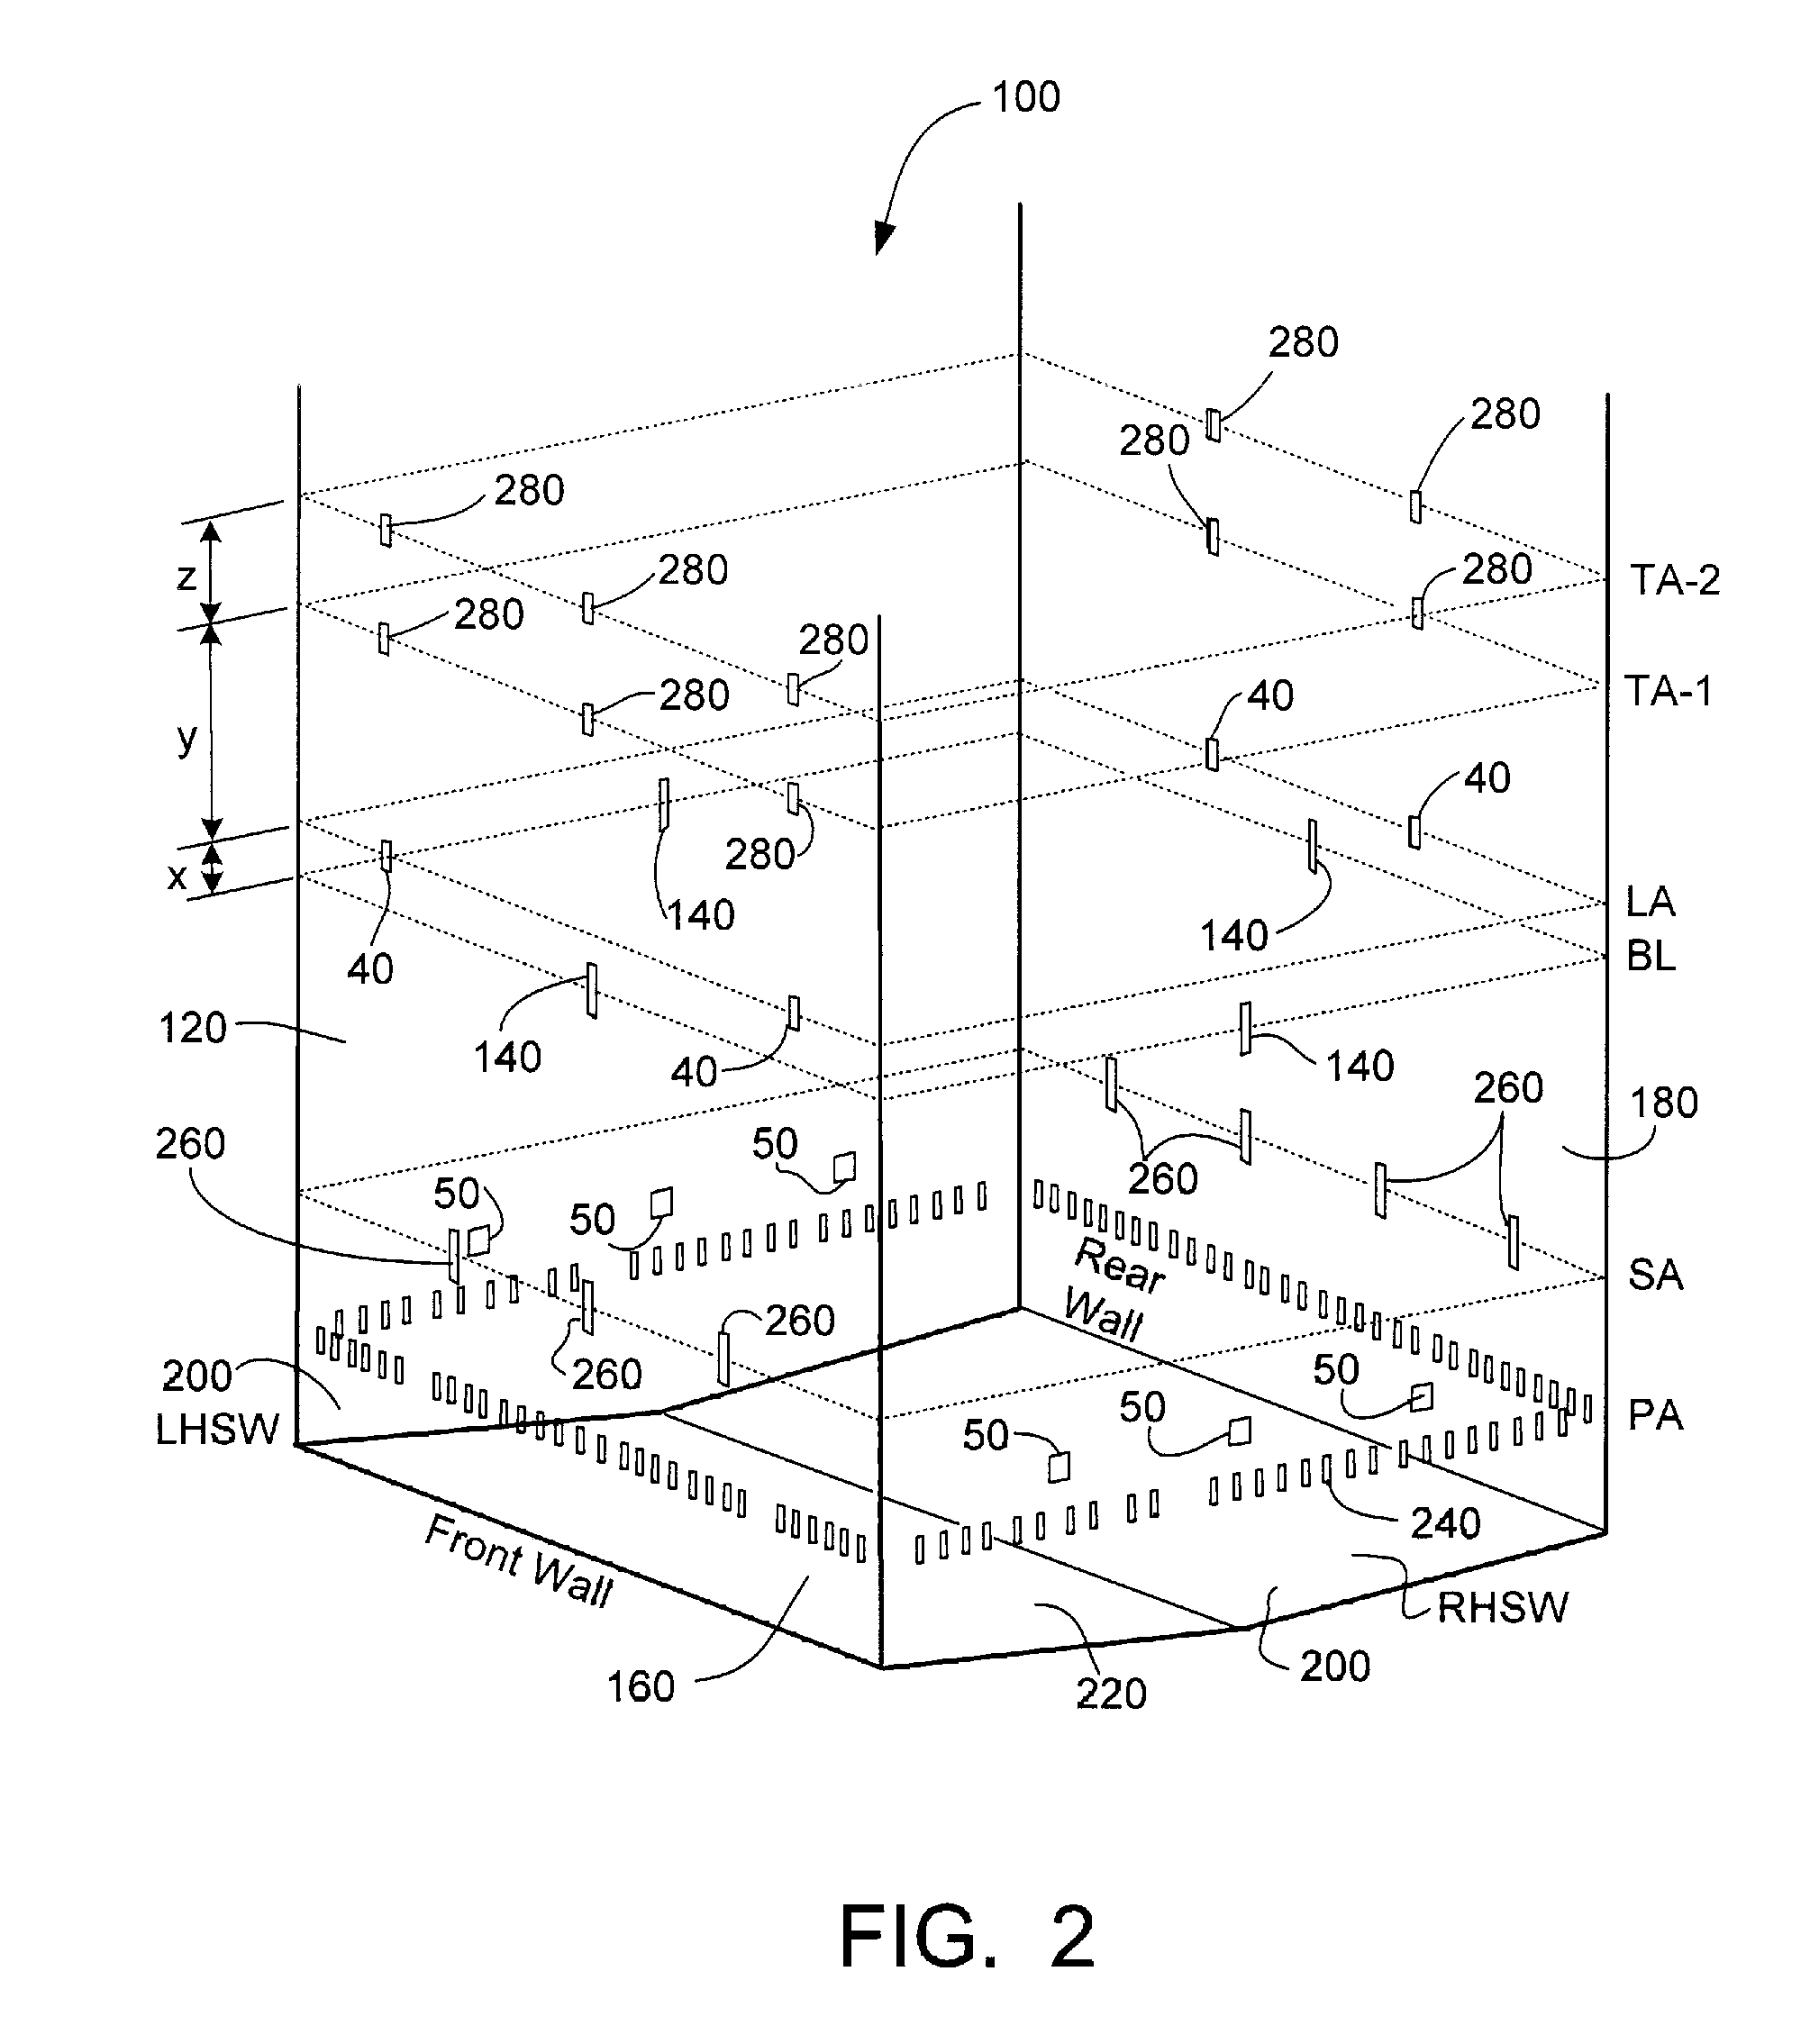 Recovery boiler combustion air system with intermediate air ports vertically aligned with multiple levels of tertiary air ports